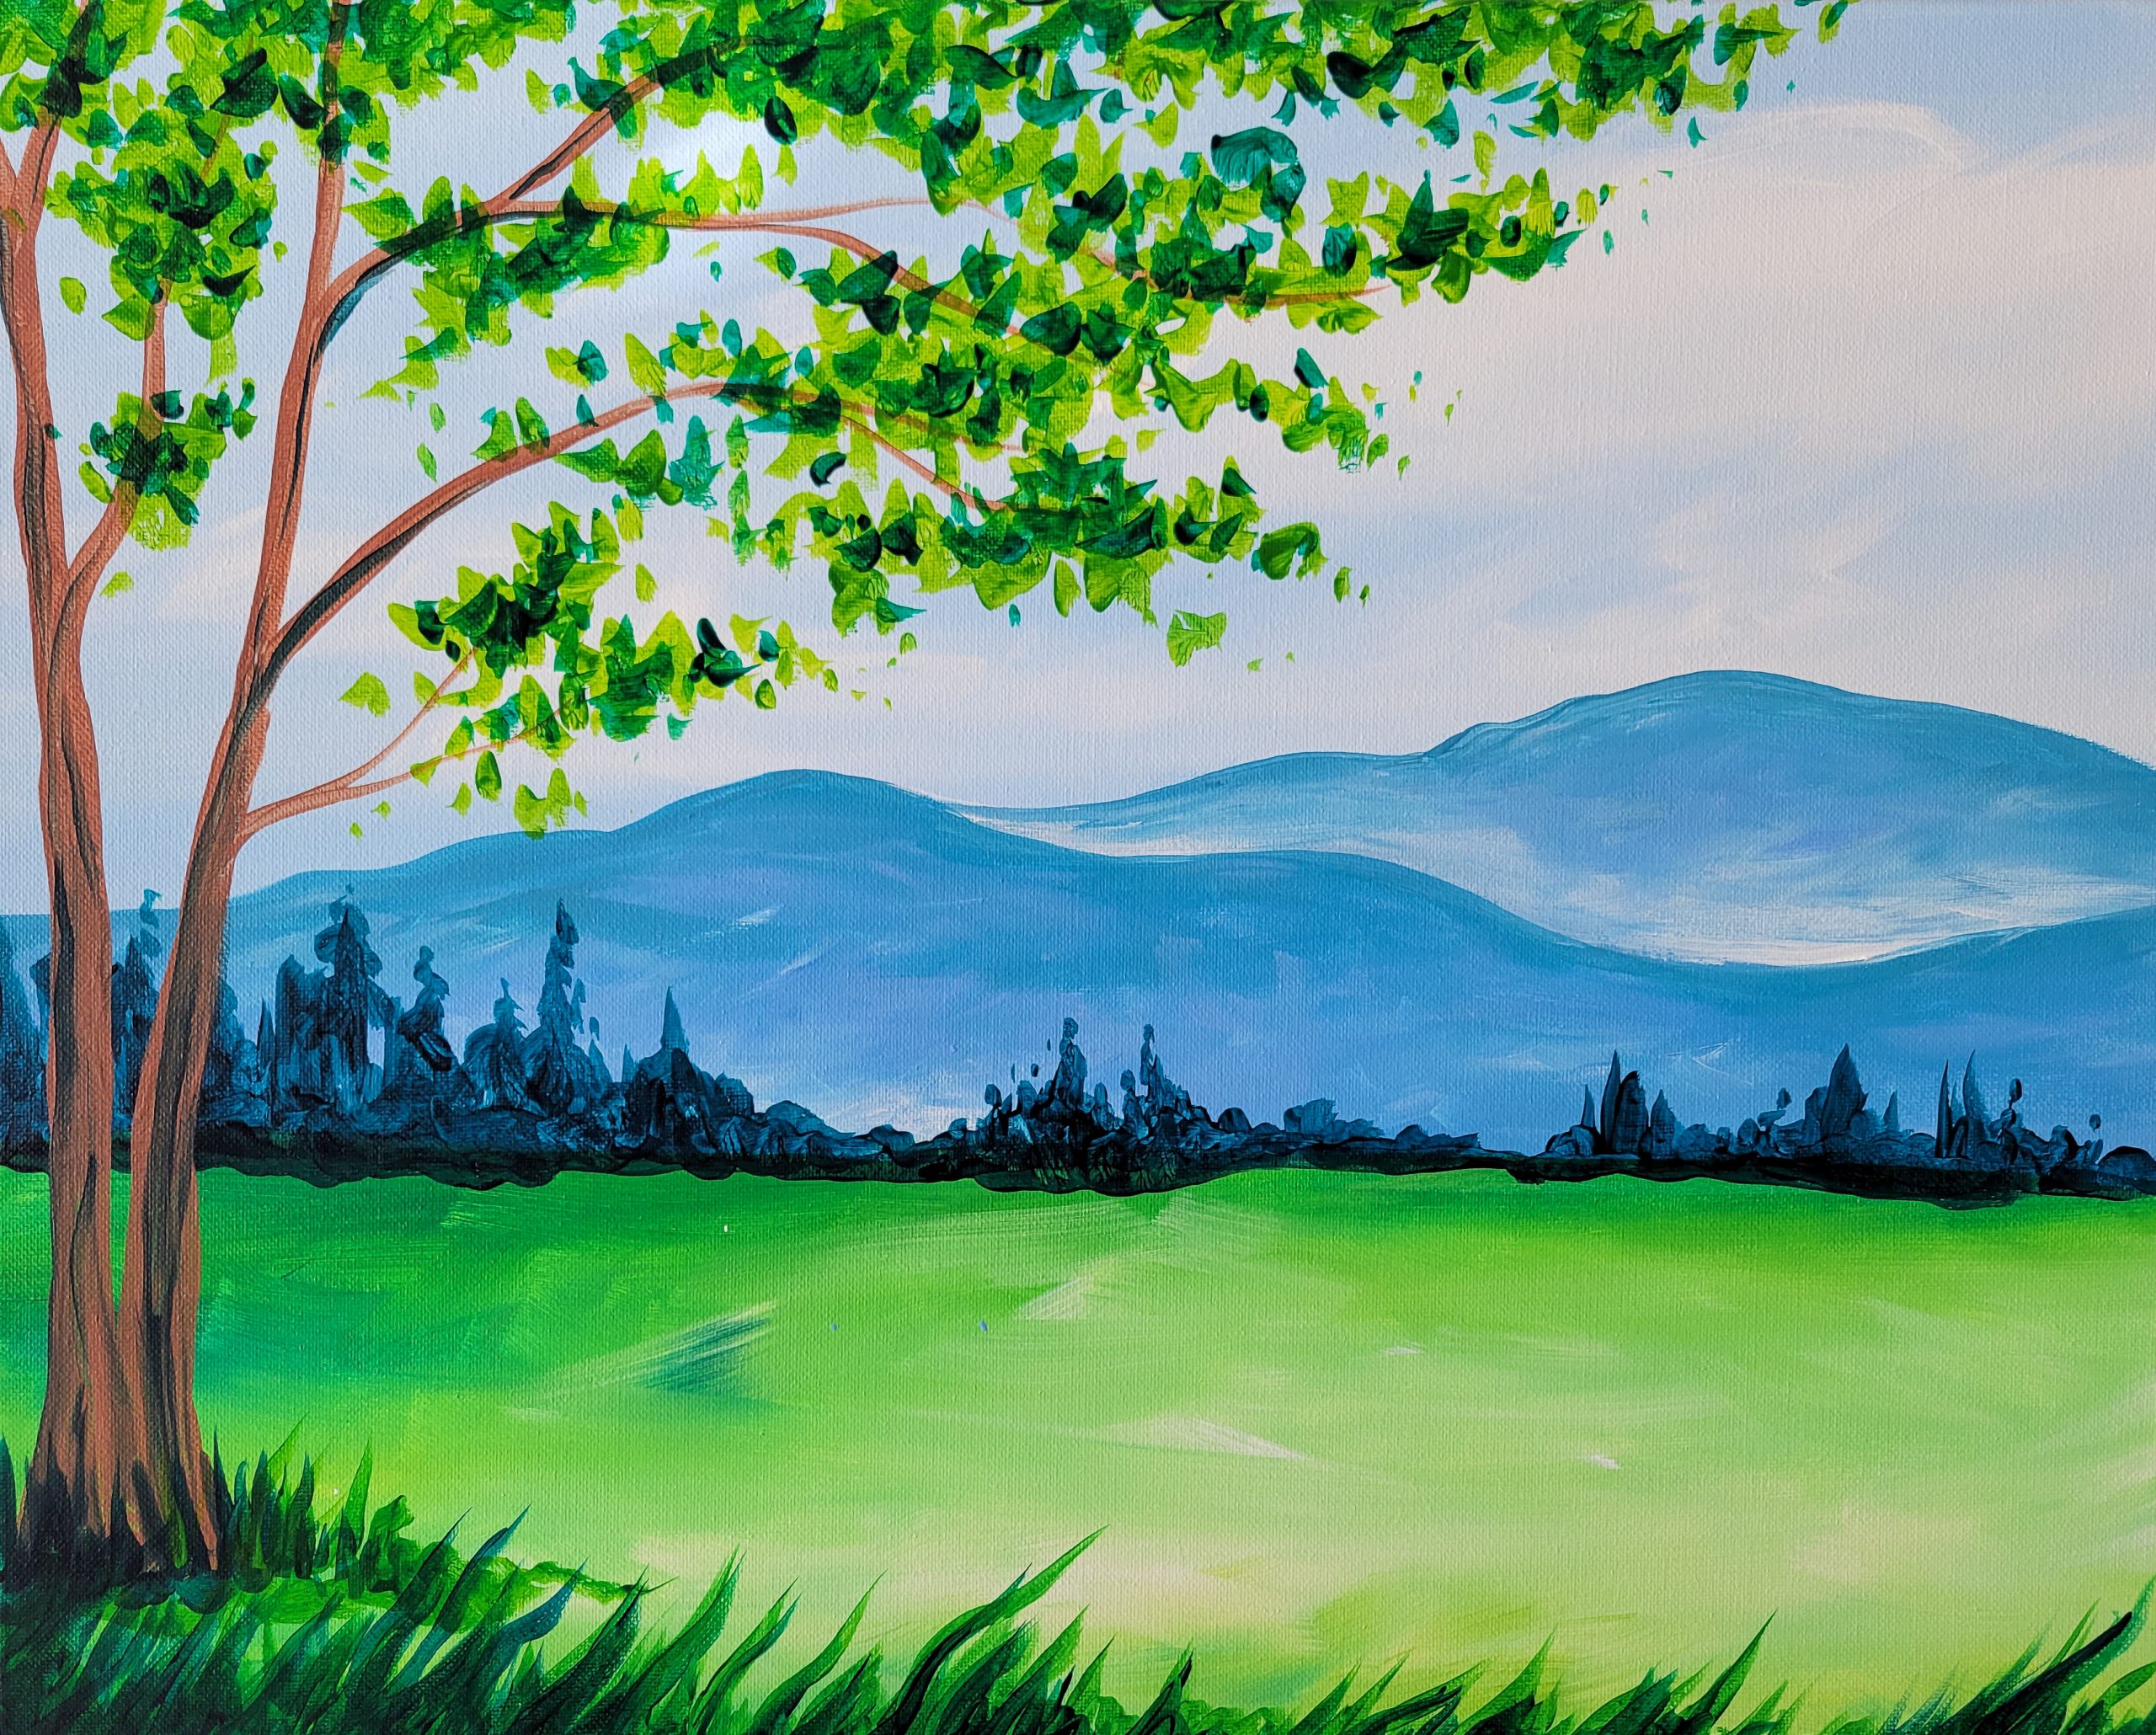 Painting of a mountain view with a tree